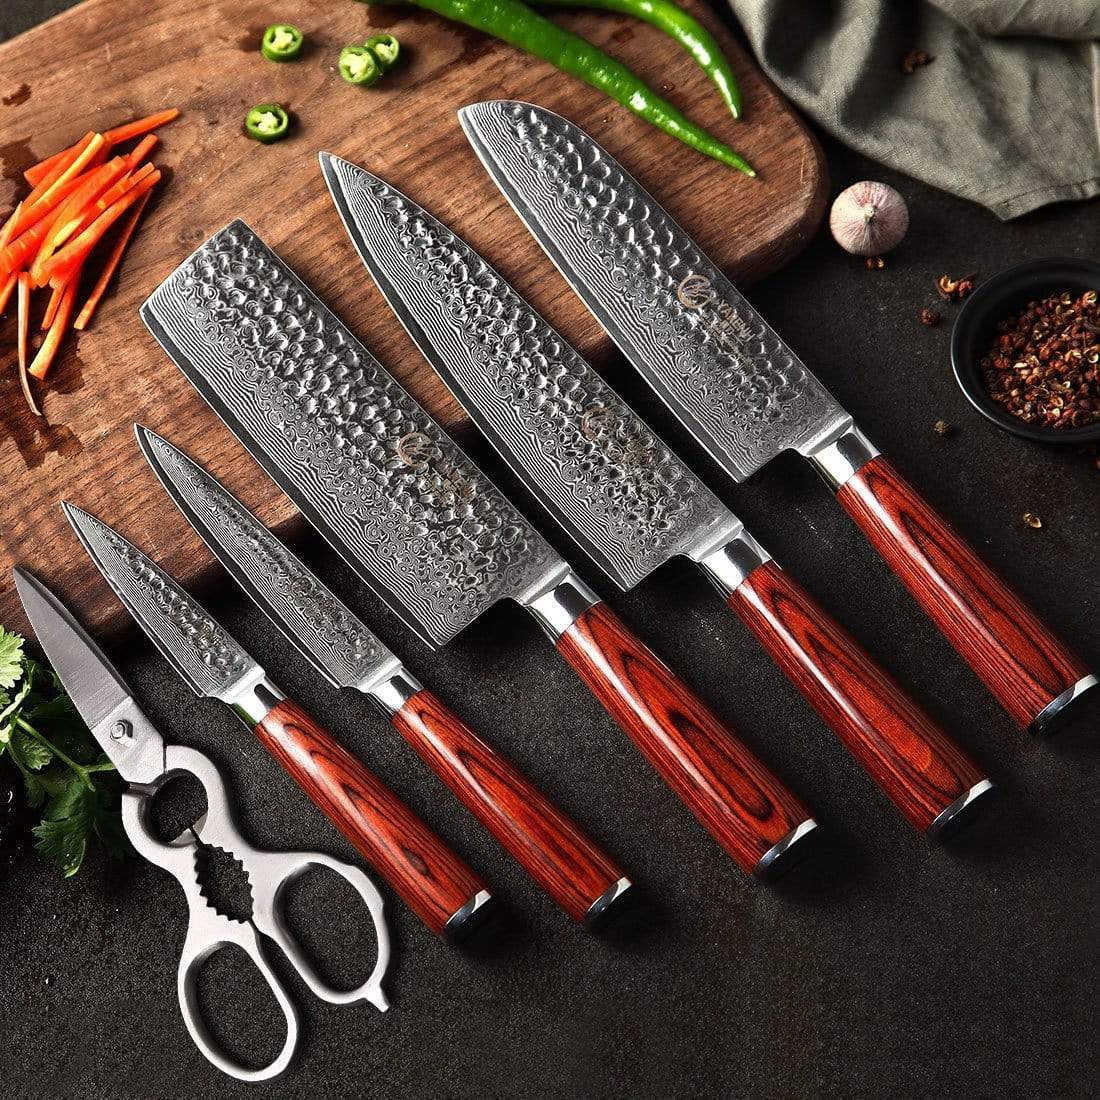 YARENH Kitchen Knife Set with Cleaver 4 Pcs, 73 Layers Damascus High Carbon Stainless Steel, Full Tang Natural Sandalwood Handle, Professional Chef